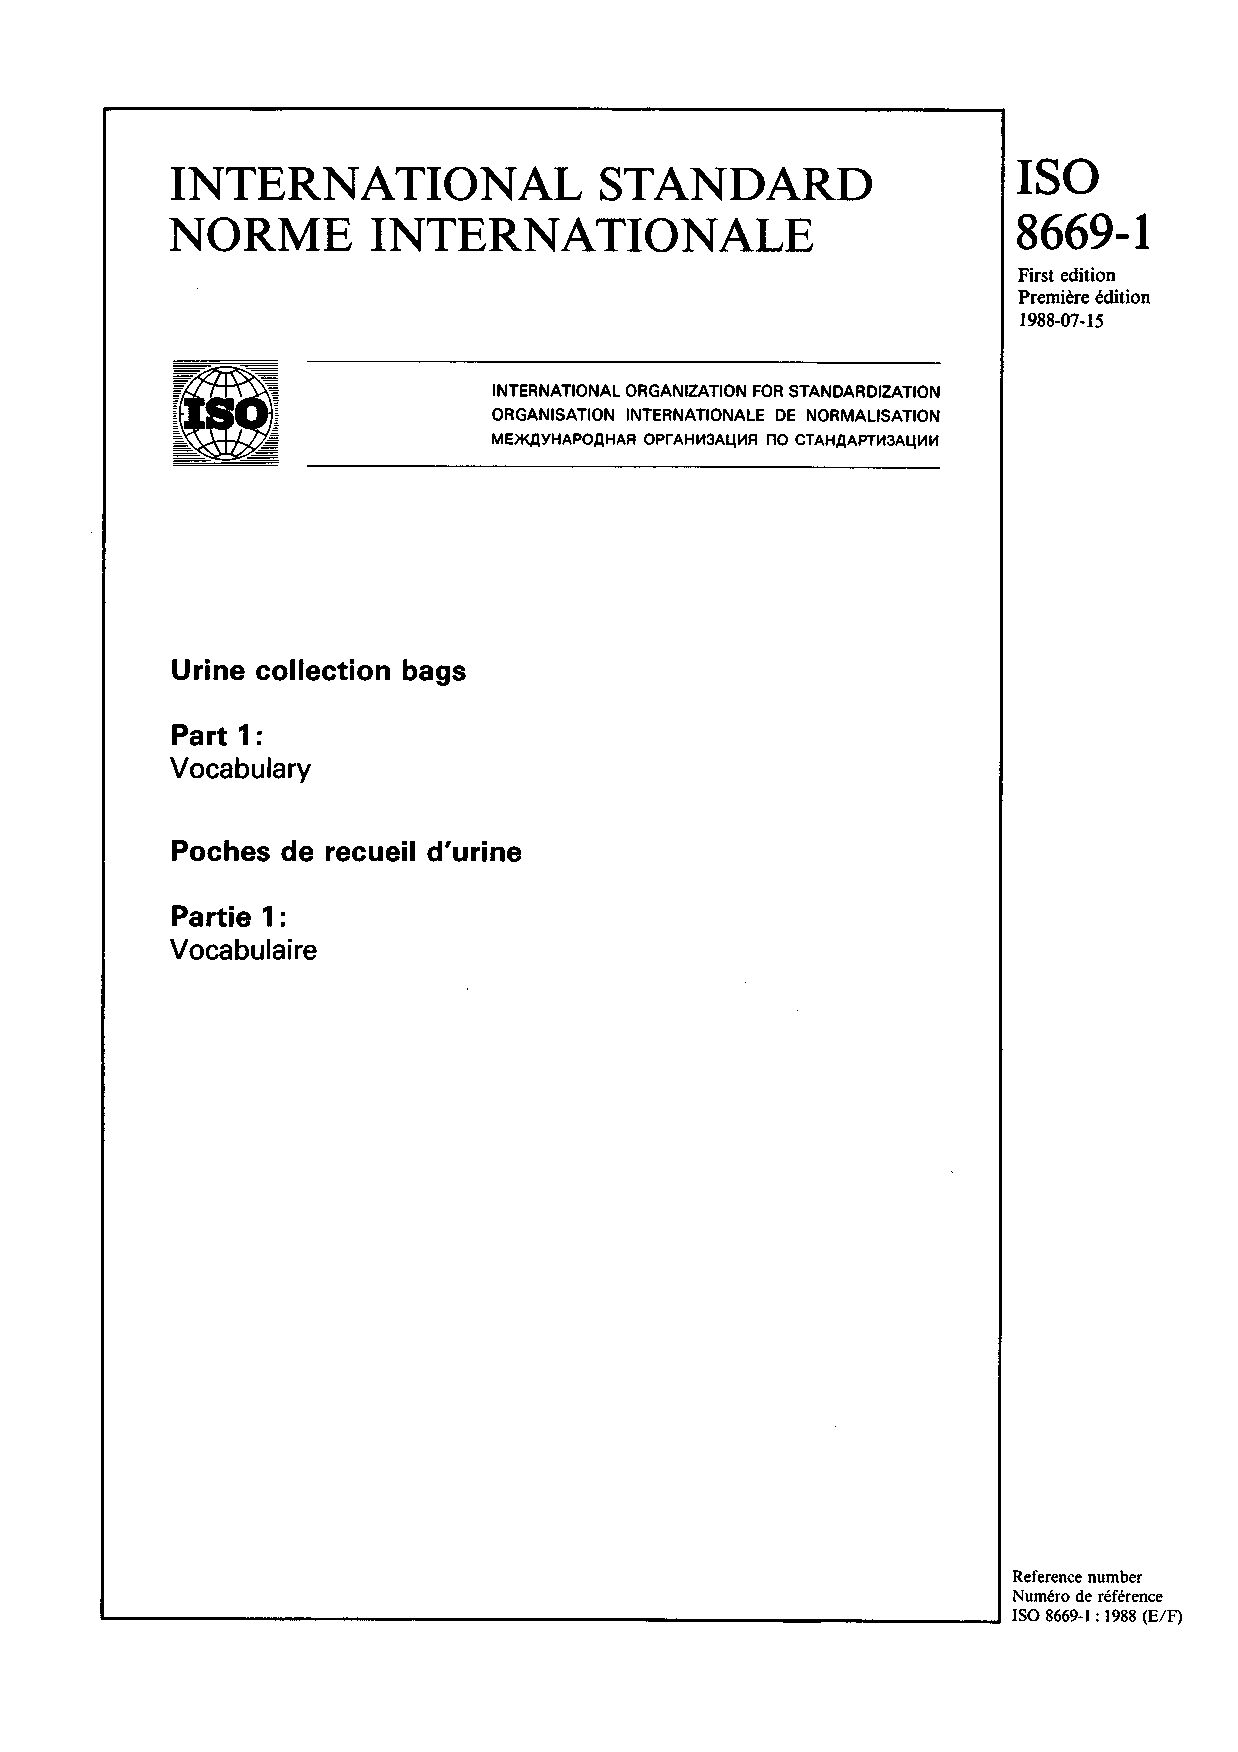 ISO 8669-1:1988